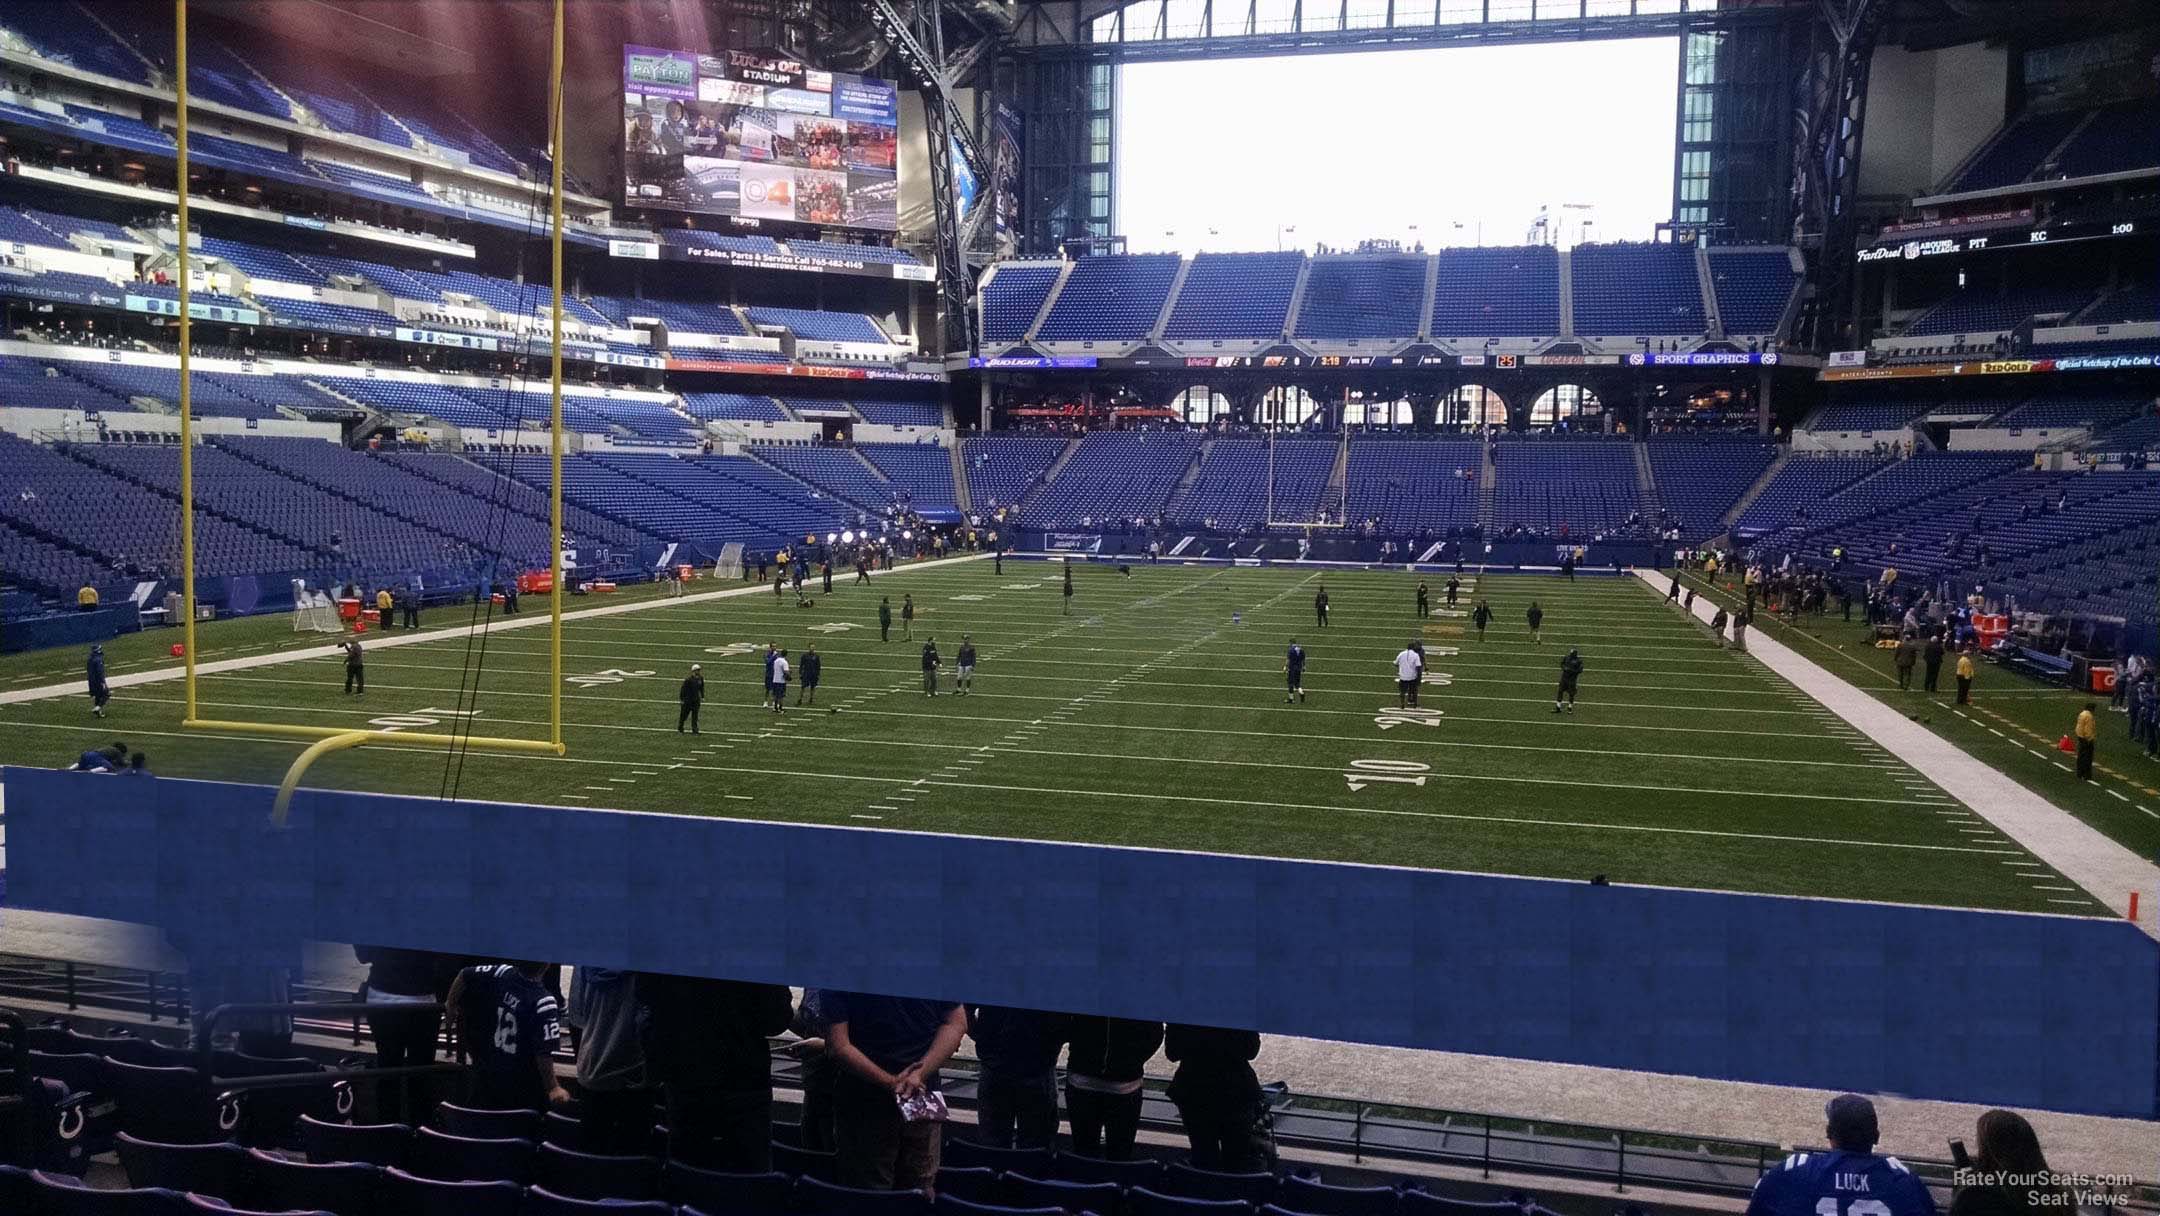 section 125, row 18 seat view  for football - lucas oil stadium